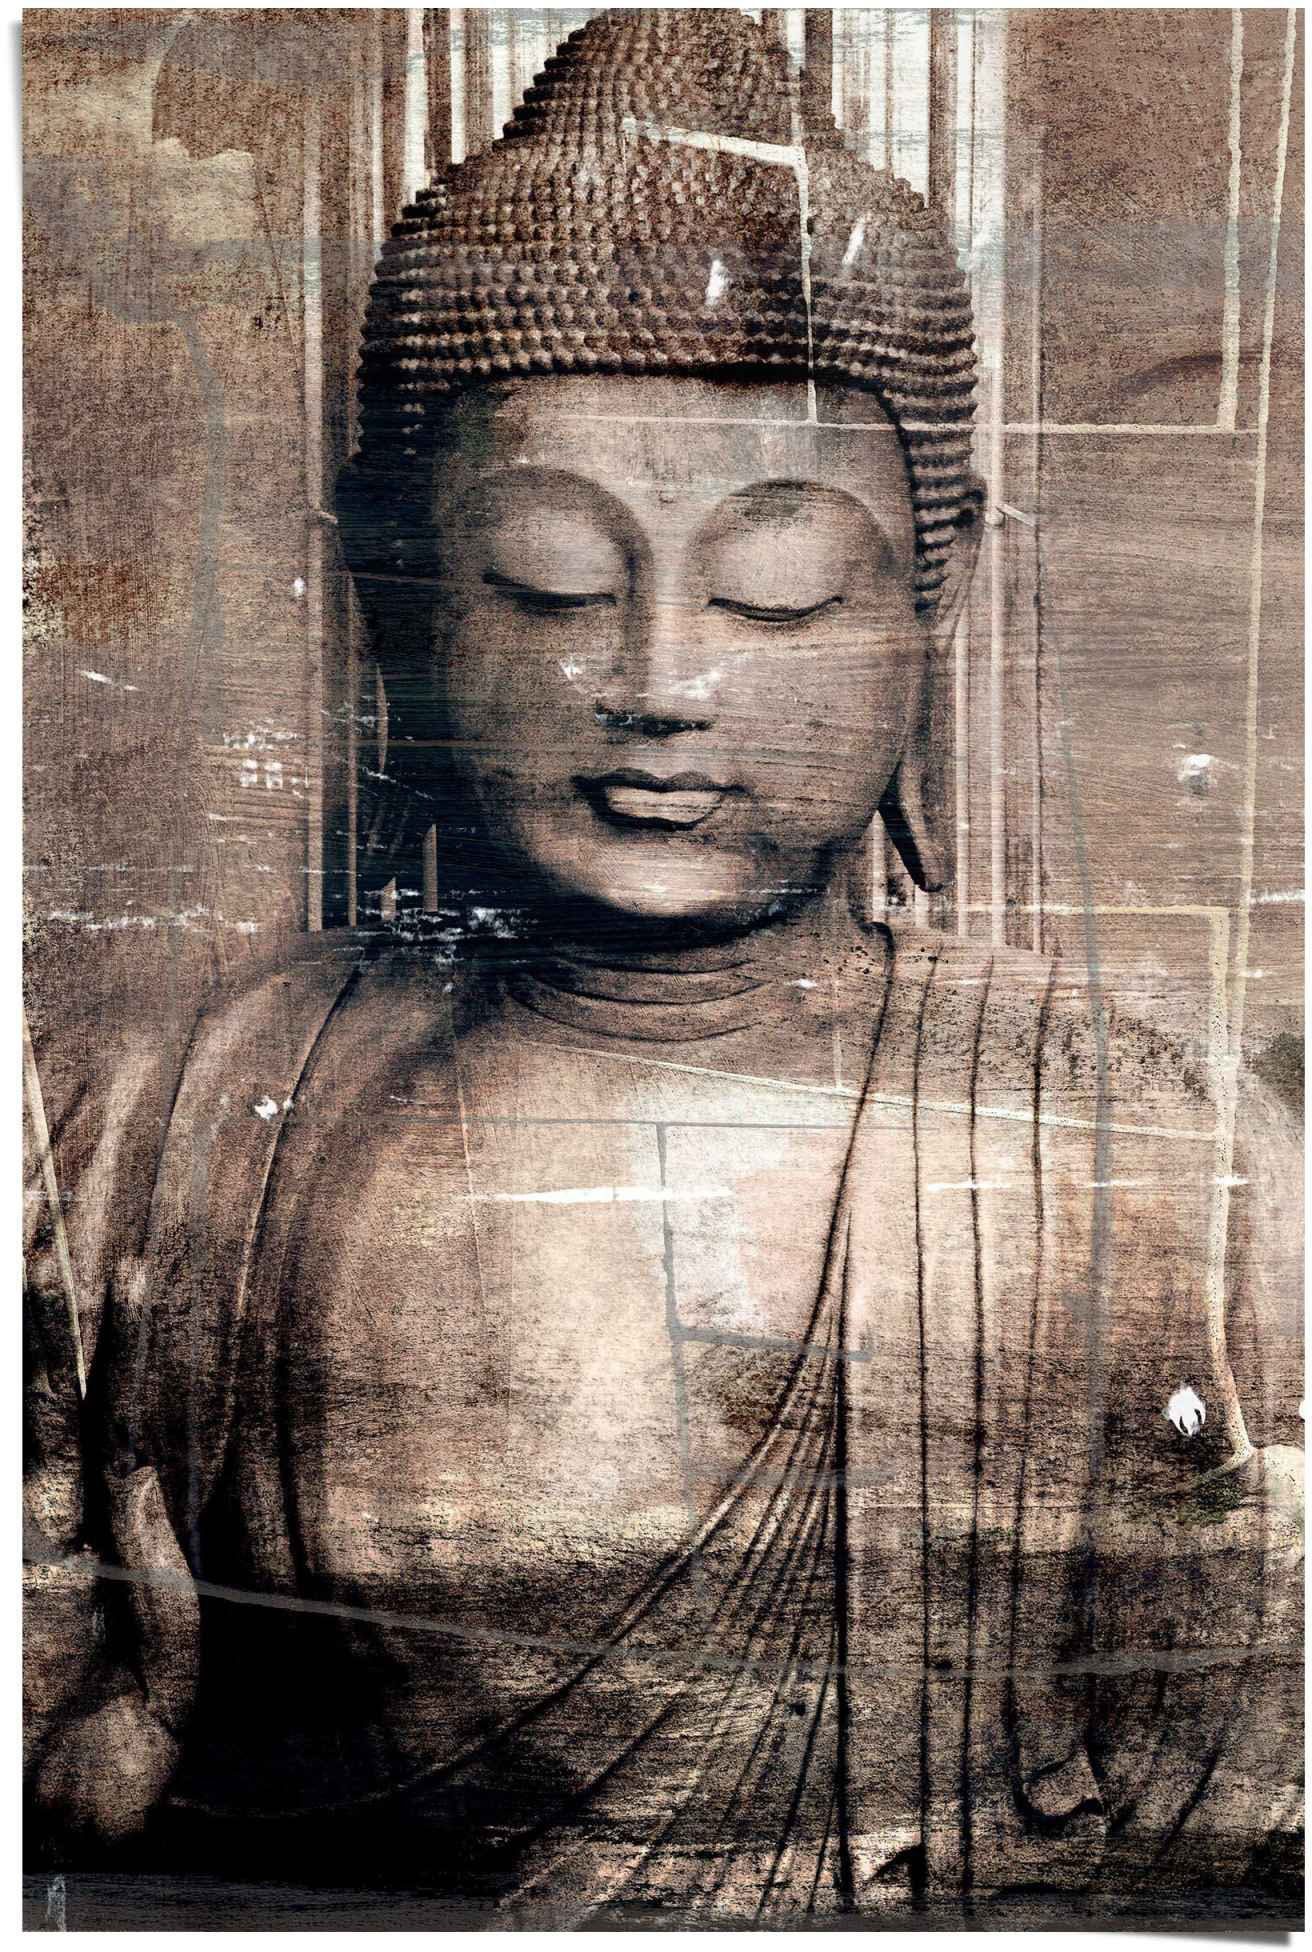 Poster St) (1 Reinders! Buddha,